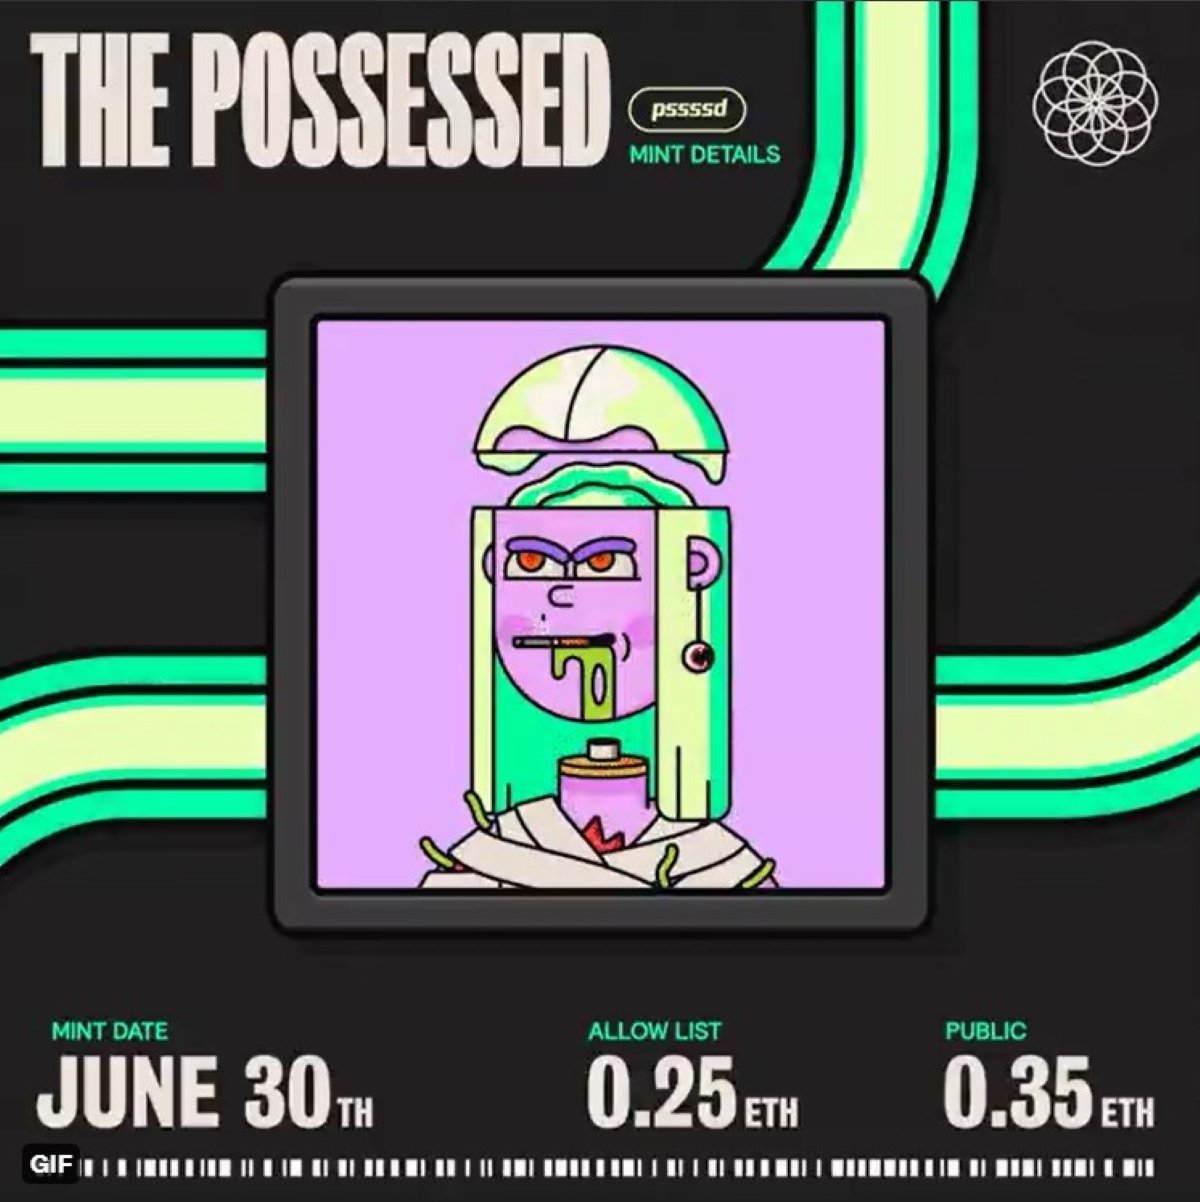 Mint poster with details for The Possessed NFT